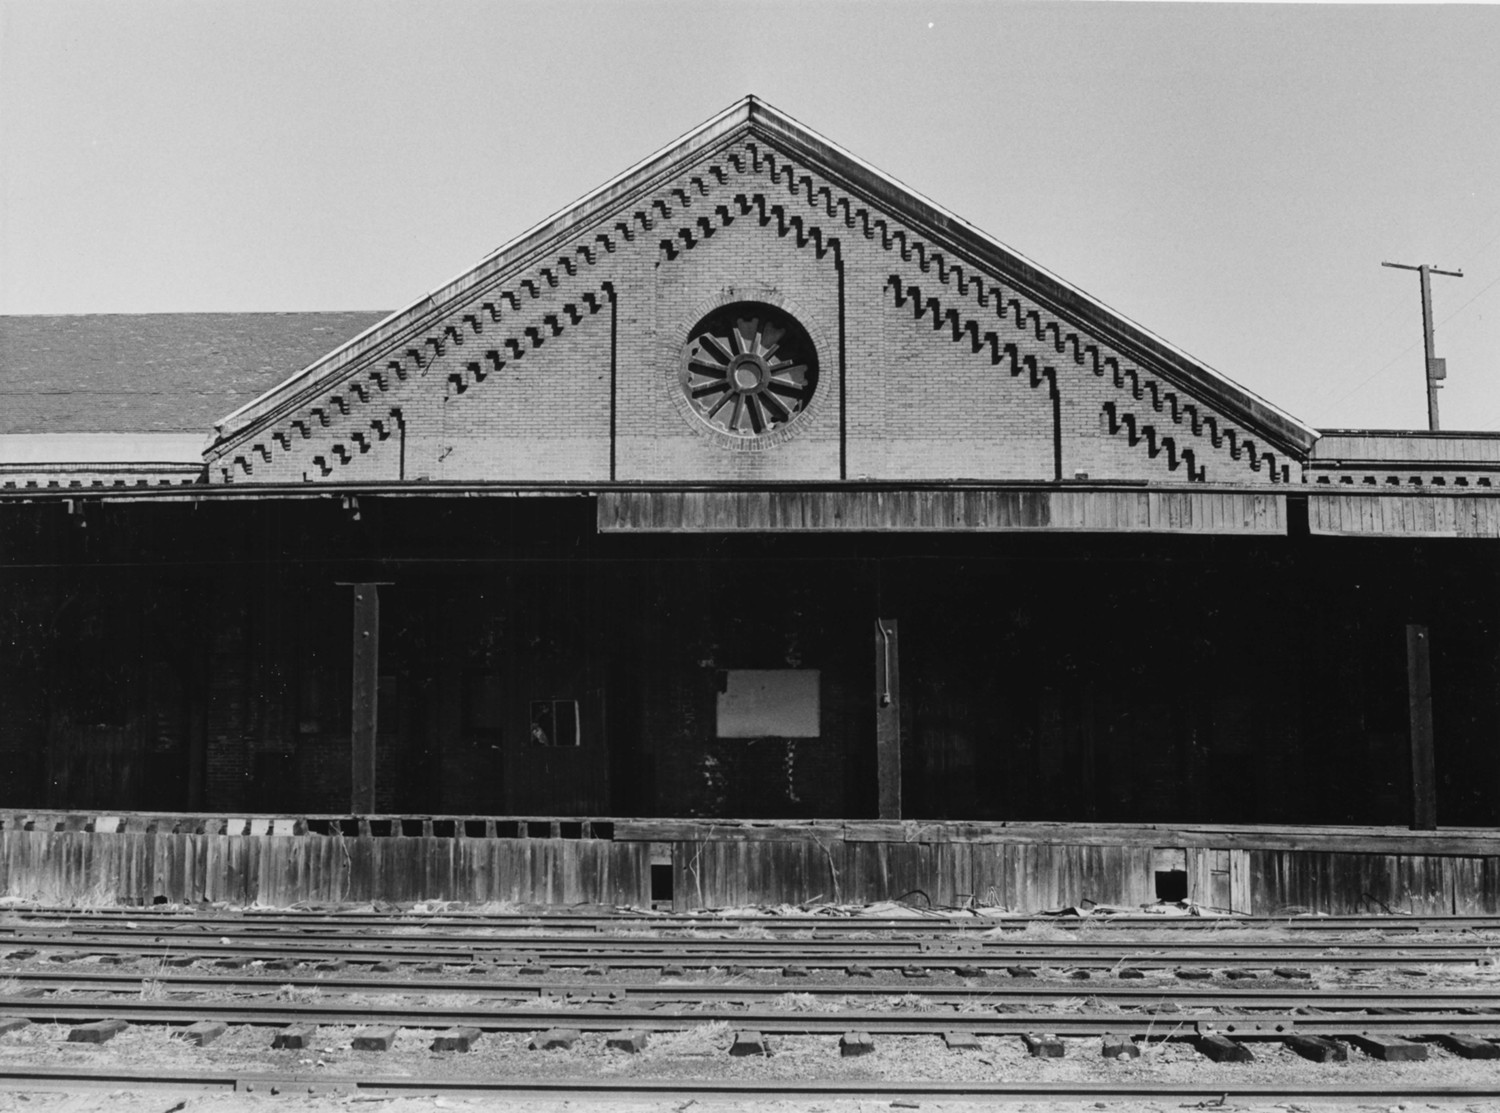 North Freight Station, Providence Rhode Island  (1973)